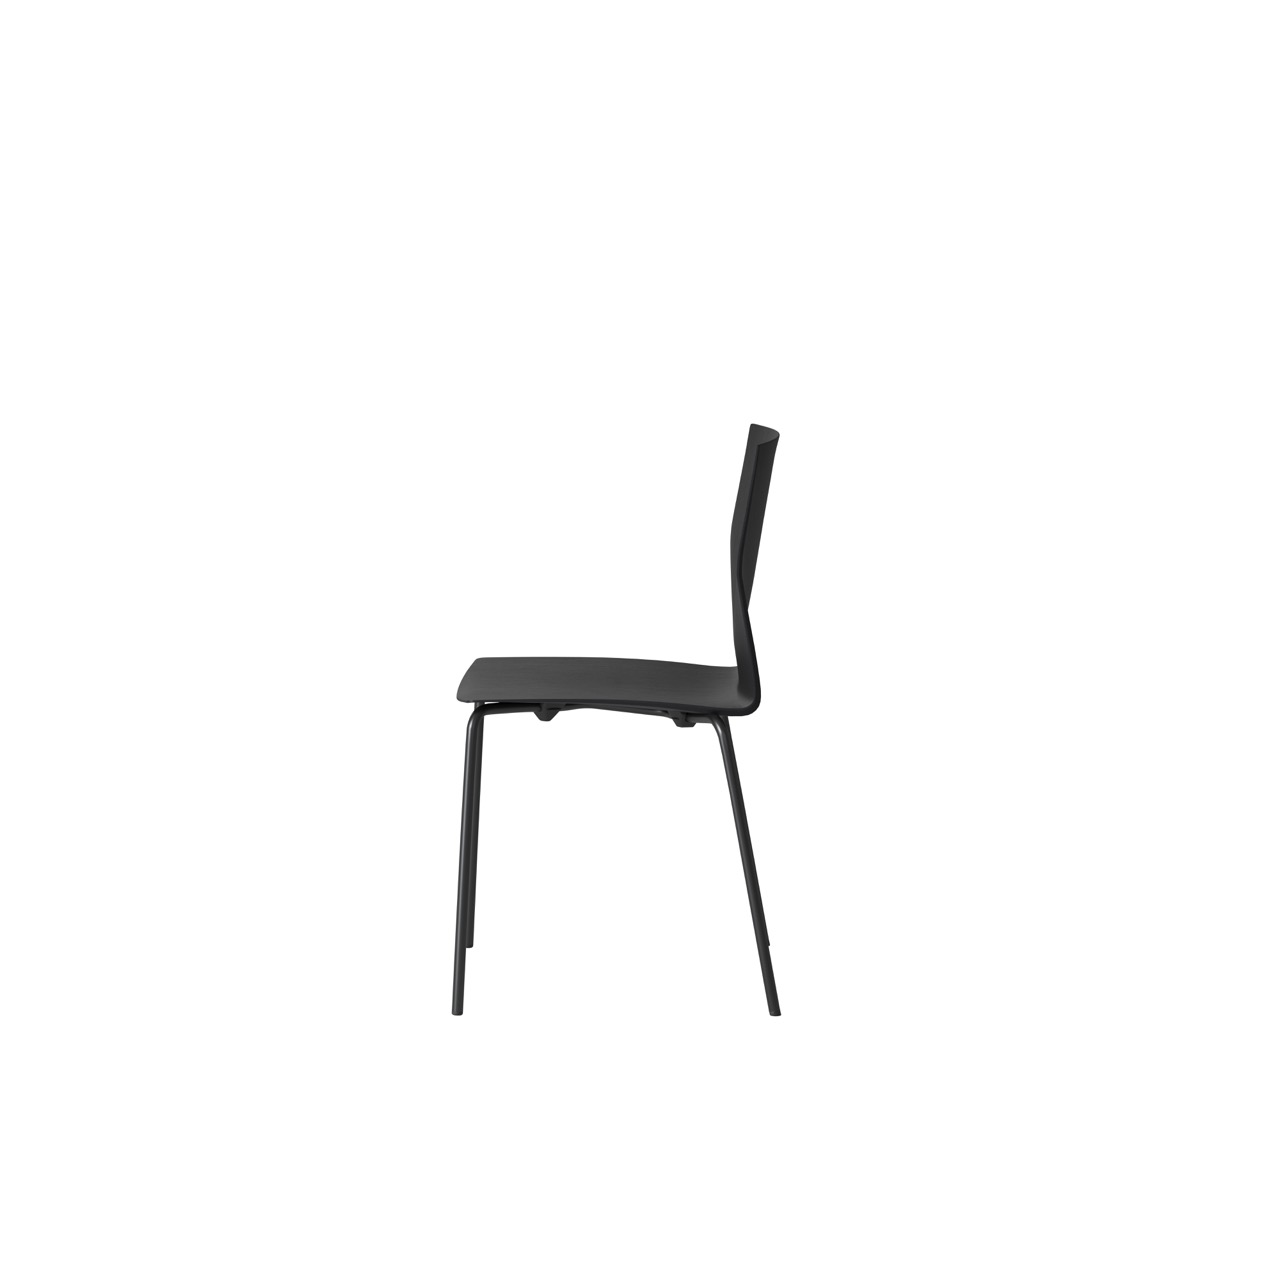 OCEE&FOUR – Chairs – FourCast 2 Four – Black Veneer Shell - Packshot Image 2 Large